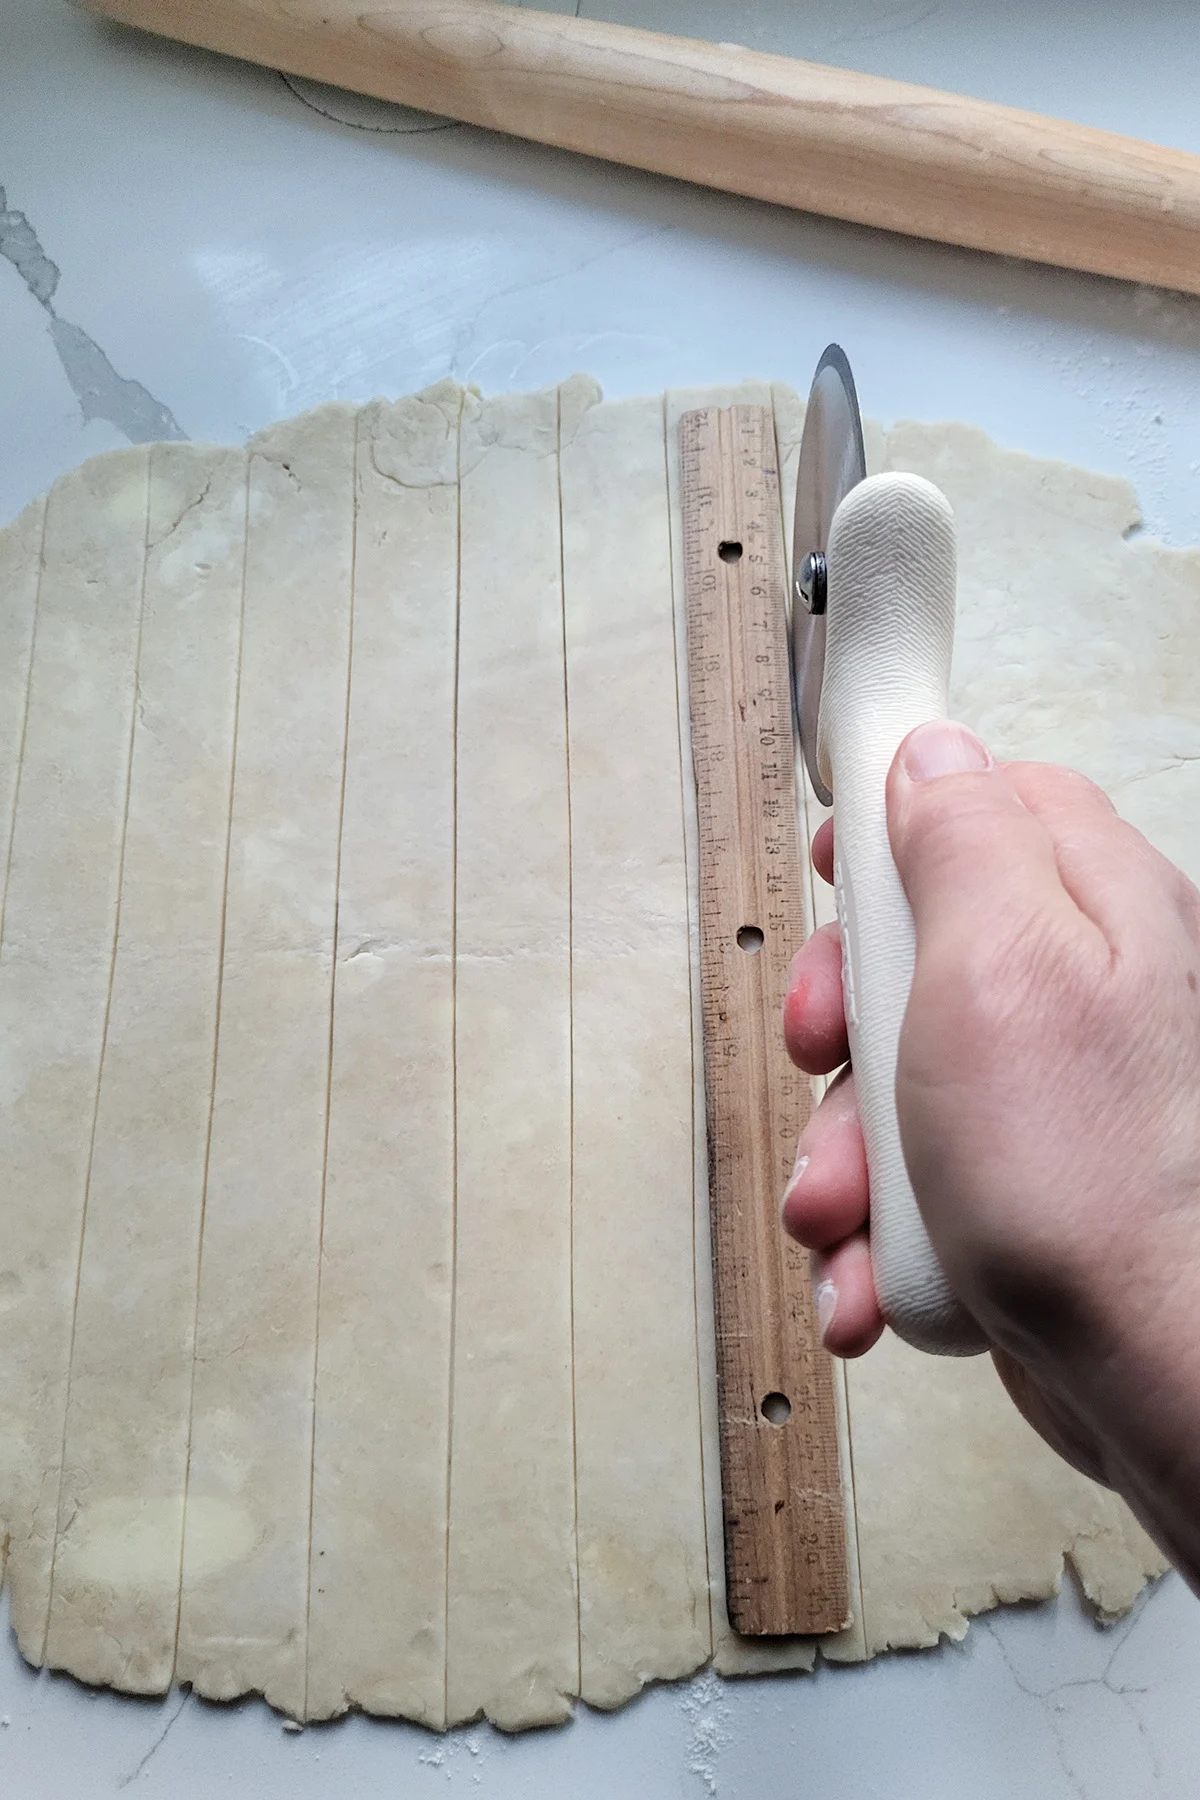 Rolled pie dough being cut into strips with a pizza cutter.